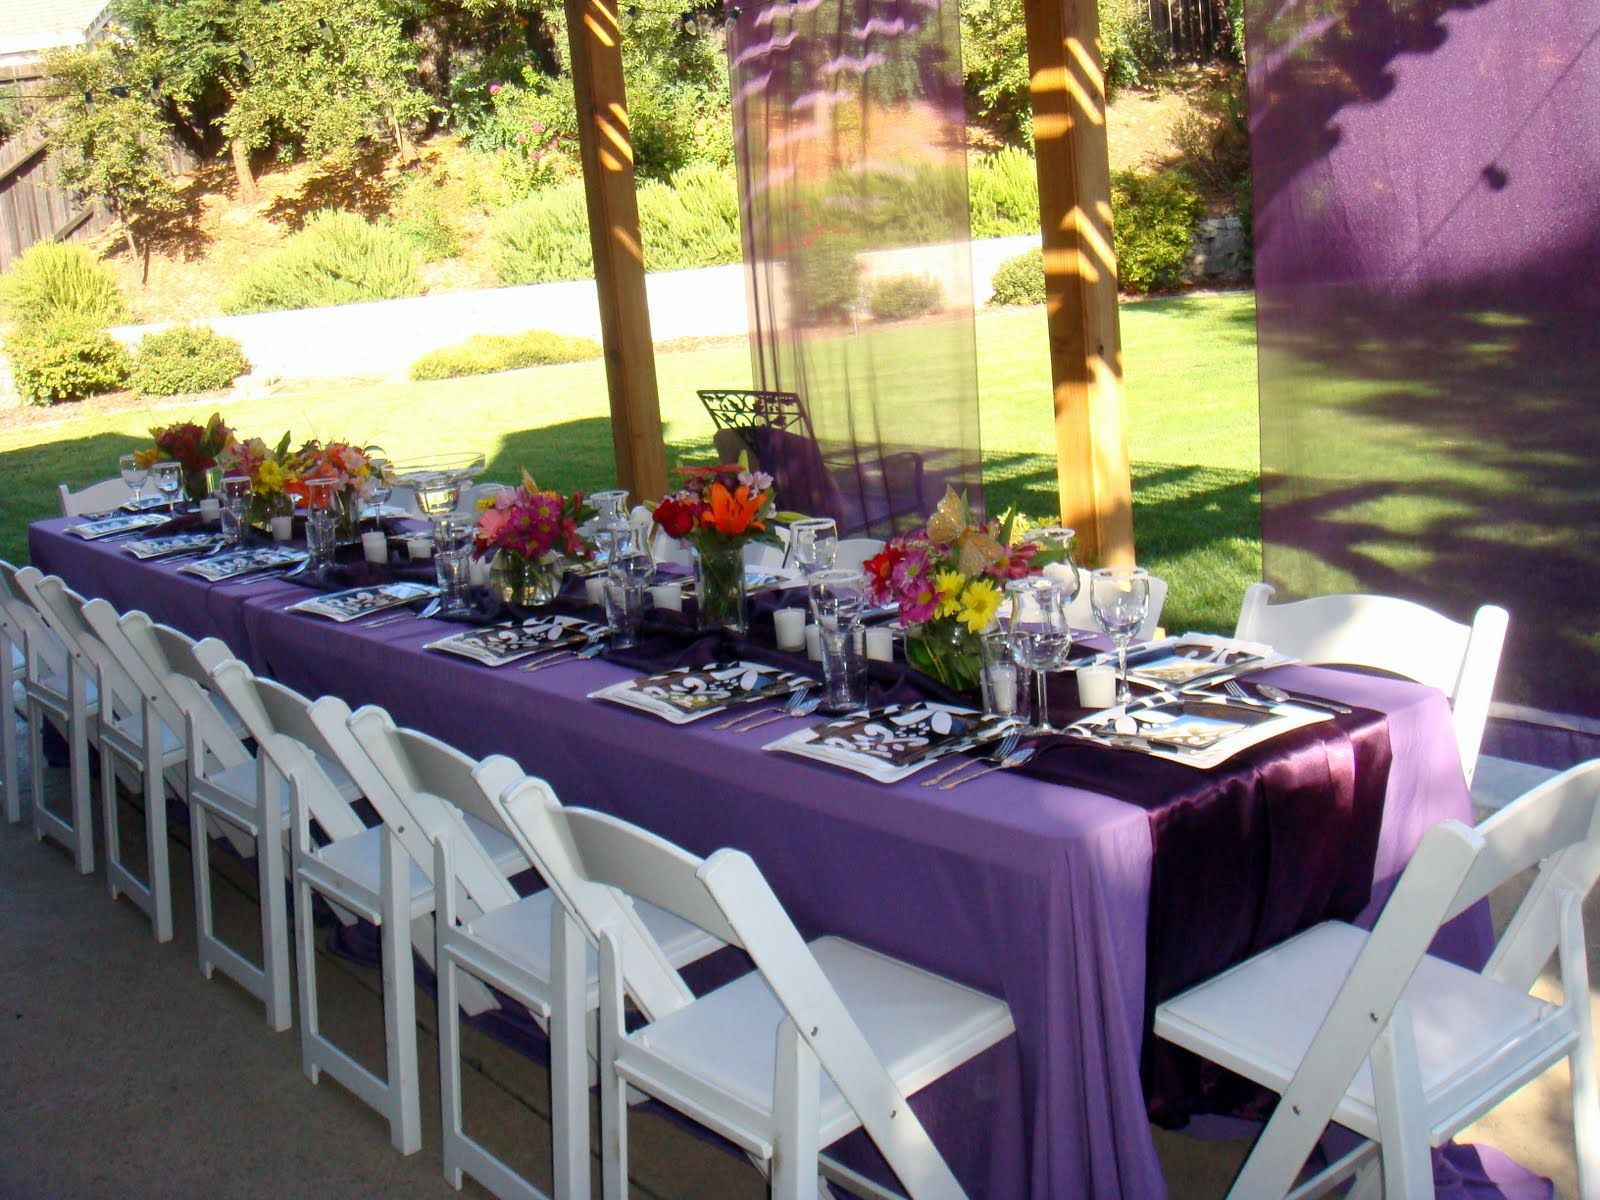 Graduation Party Ideas In The Backyard
 tablescapes for outdoor graduation party